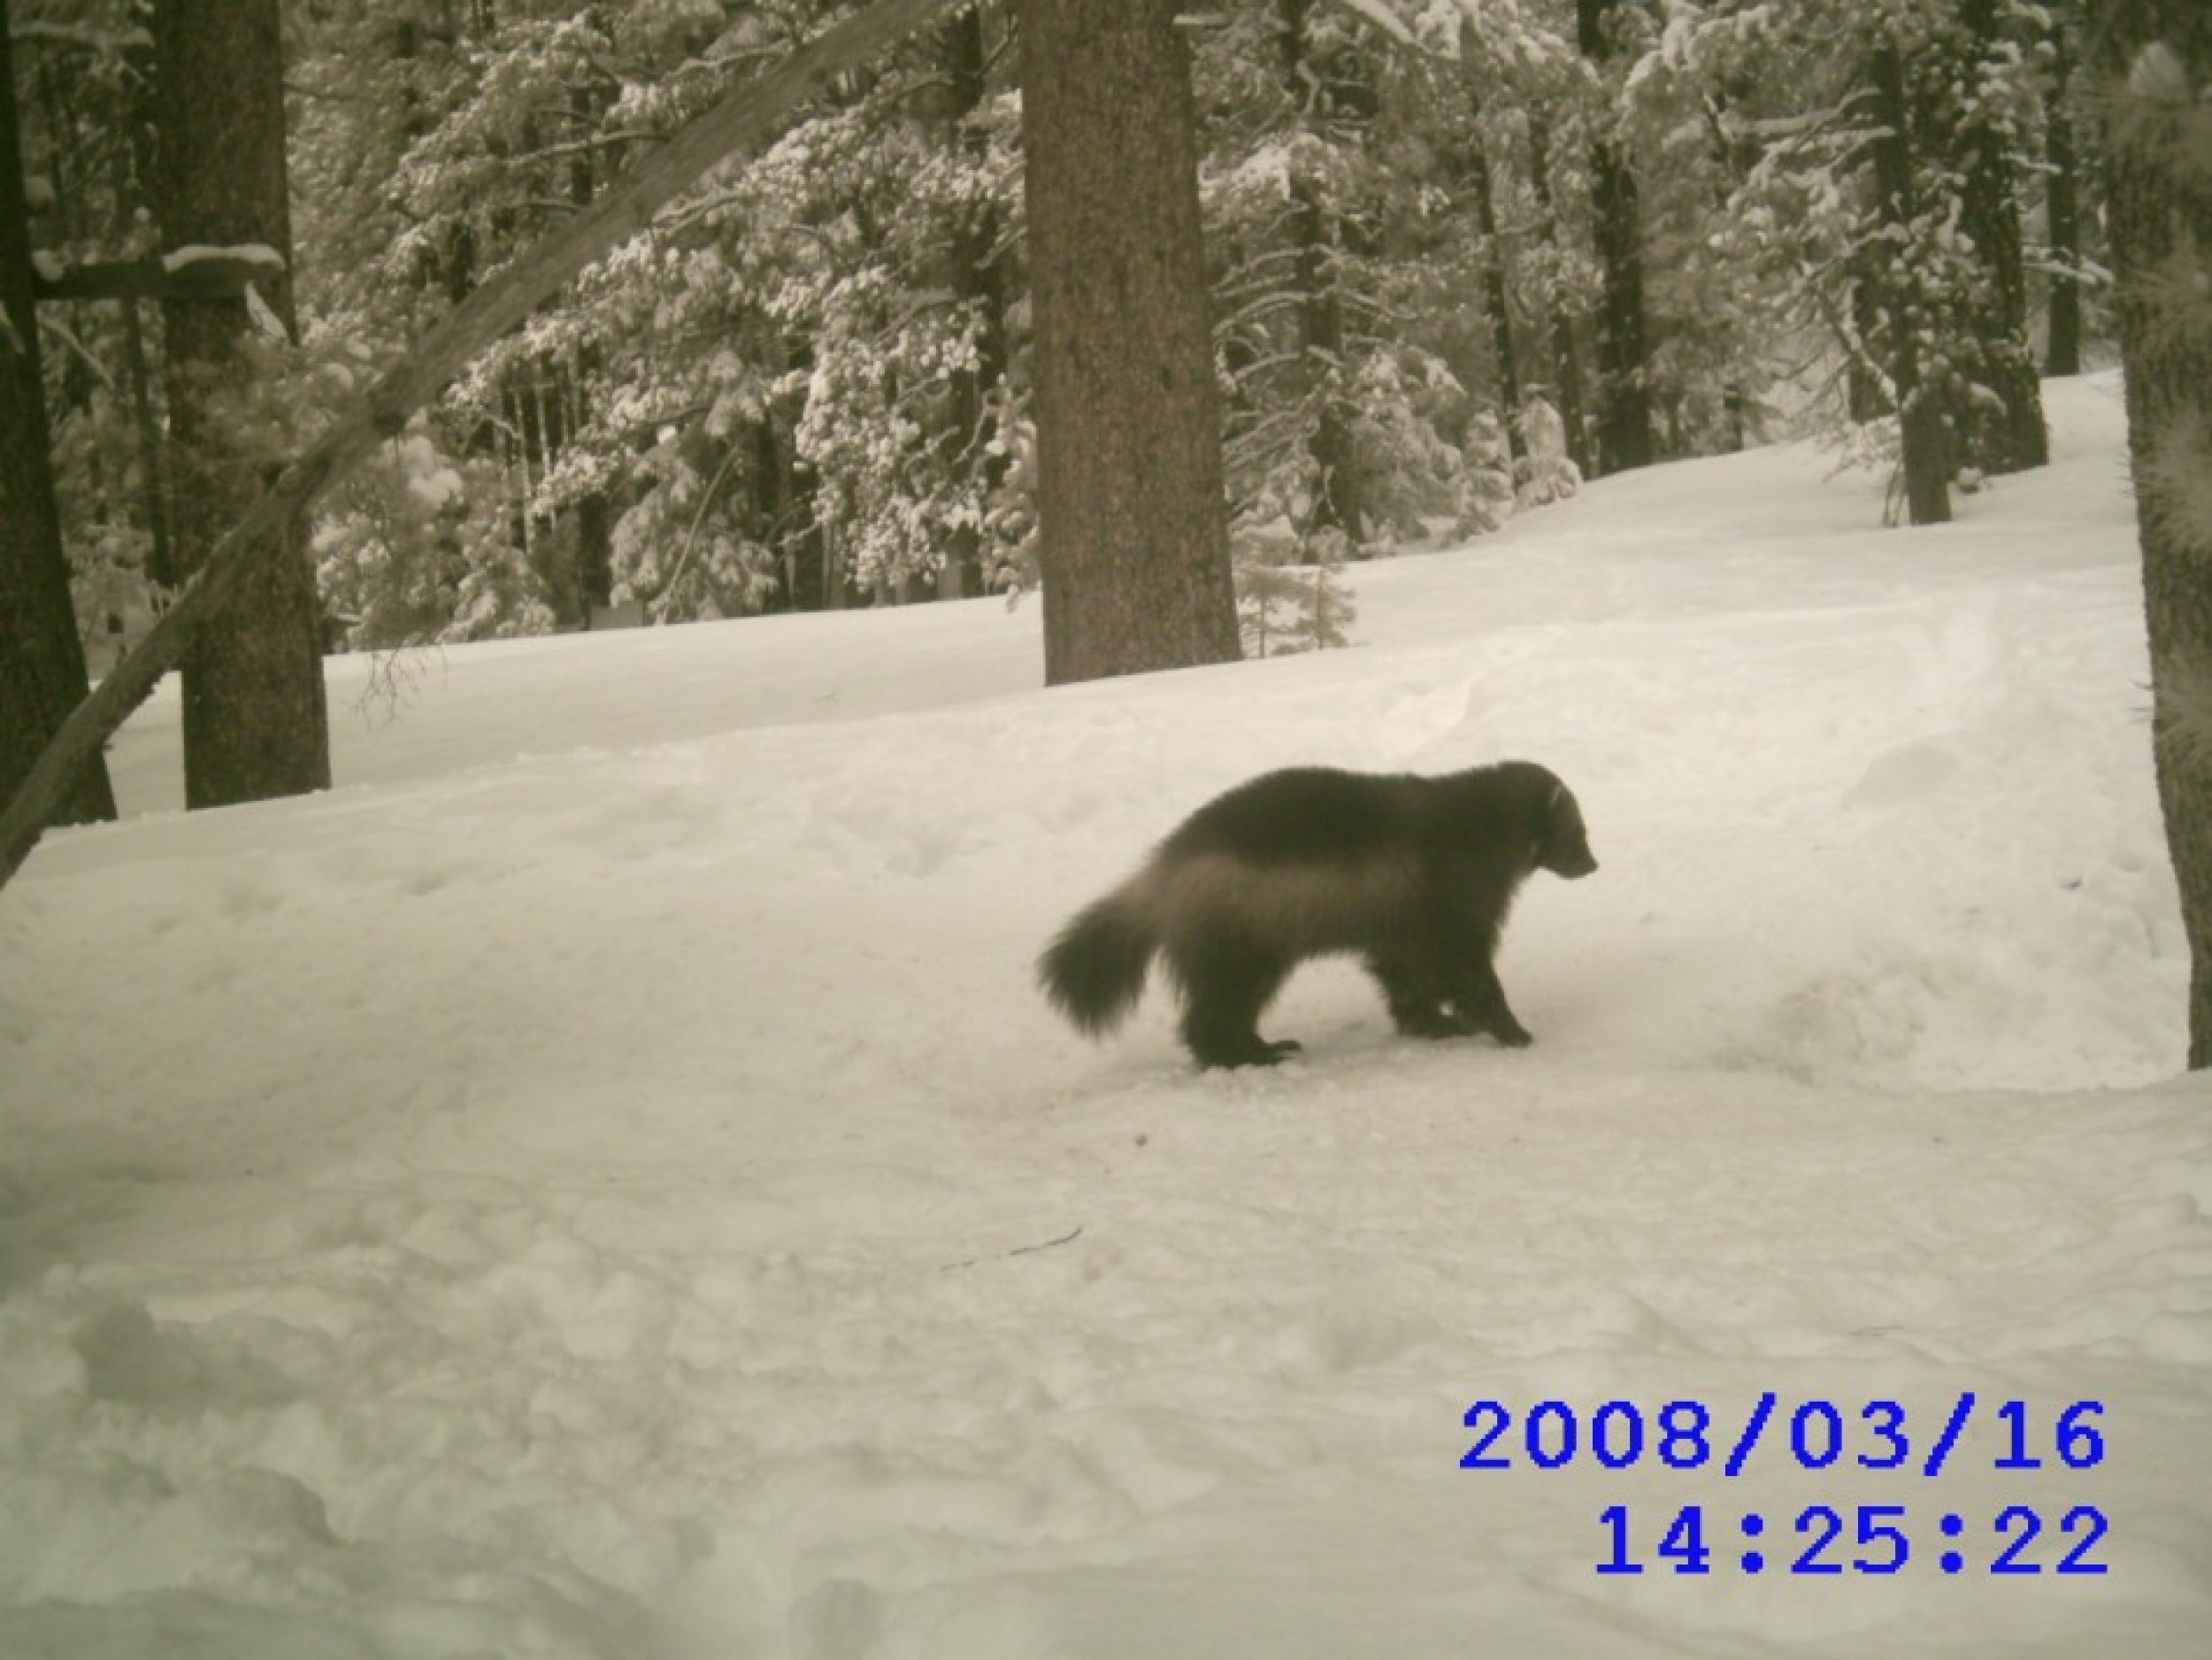 A 2008 sighting of a wolverine, the third, in the Tahoe National Forest, courtesy of the California Fish and Game Department of Forestry.